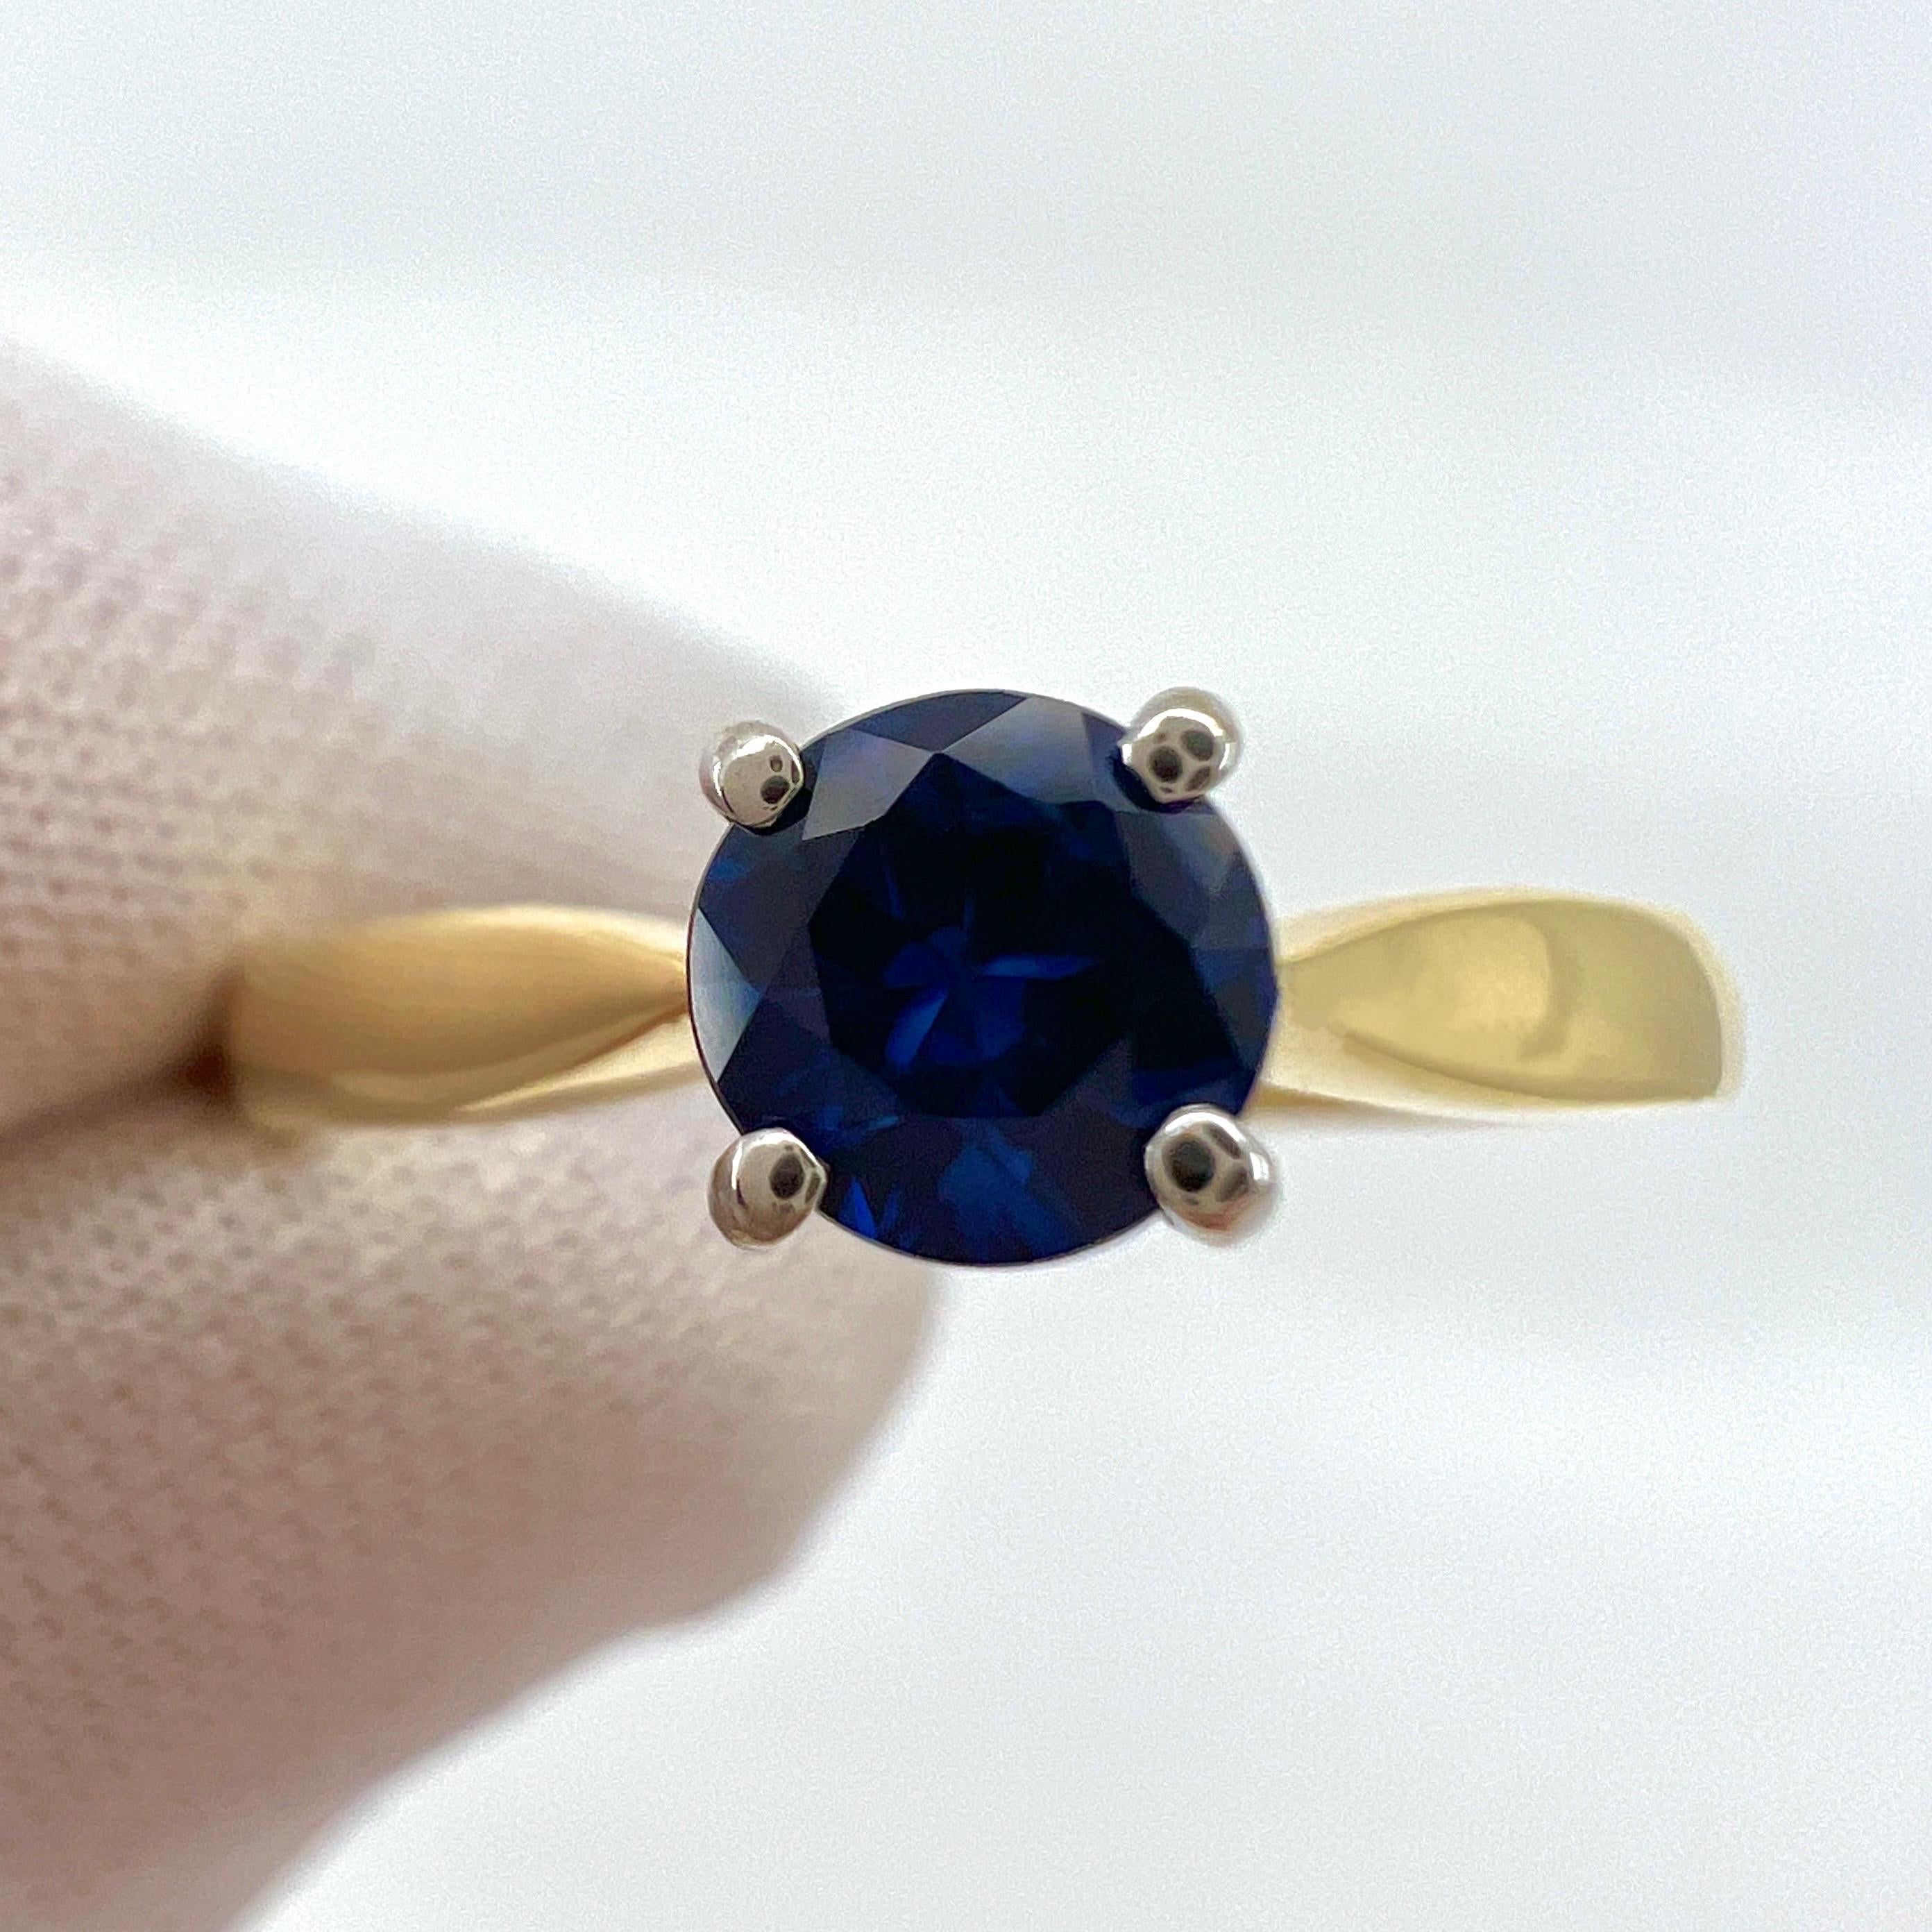 Vivid Cornflower Blue Ceylon Sapphire Round Cut 18k Yellow & White Gold Solitaire Ring.

Top grade 0.50 carat sapphire with a stunning vivid cornflower blue colour and excellent clarity. Very clean stone.
Also has an excellent round brilliant cut